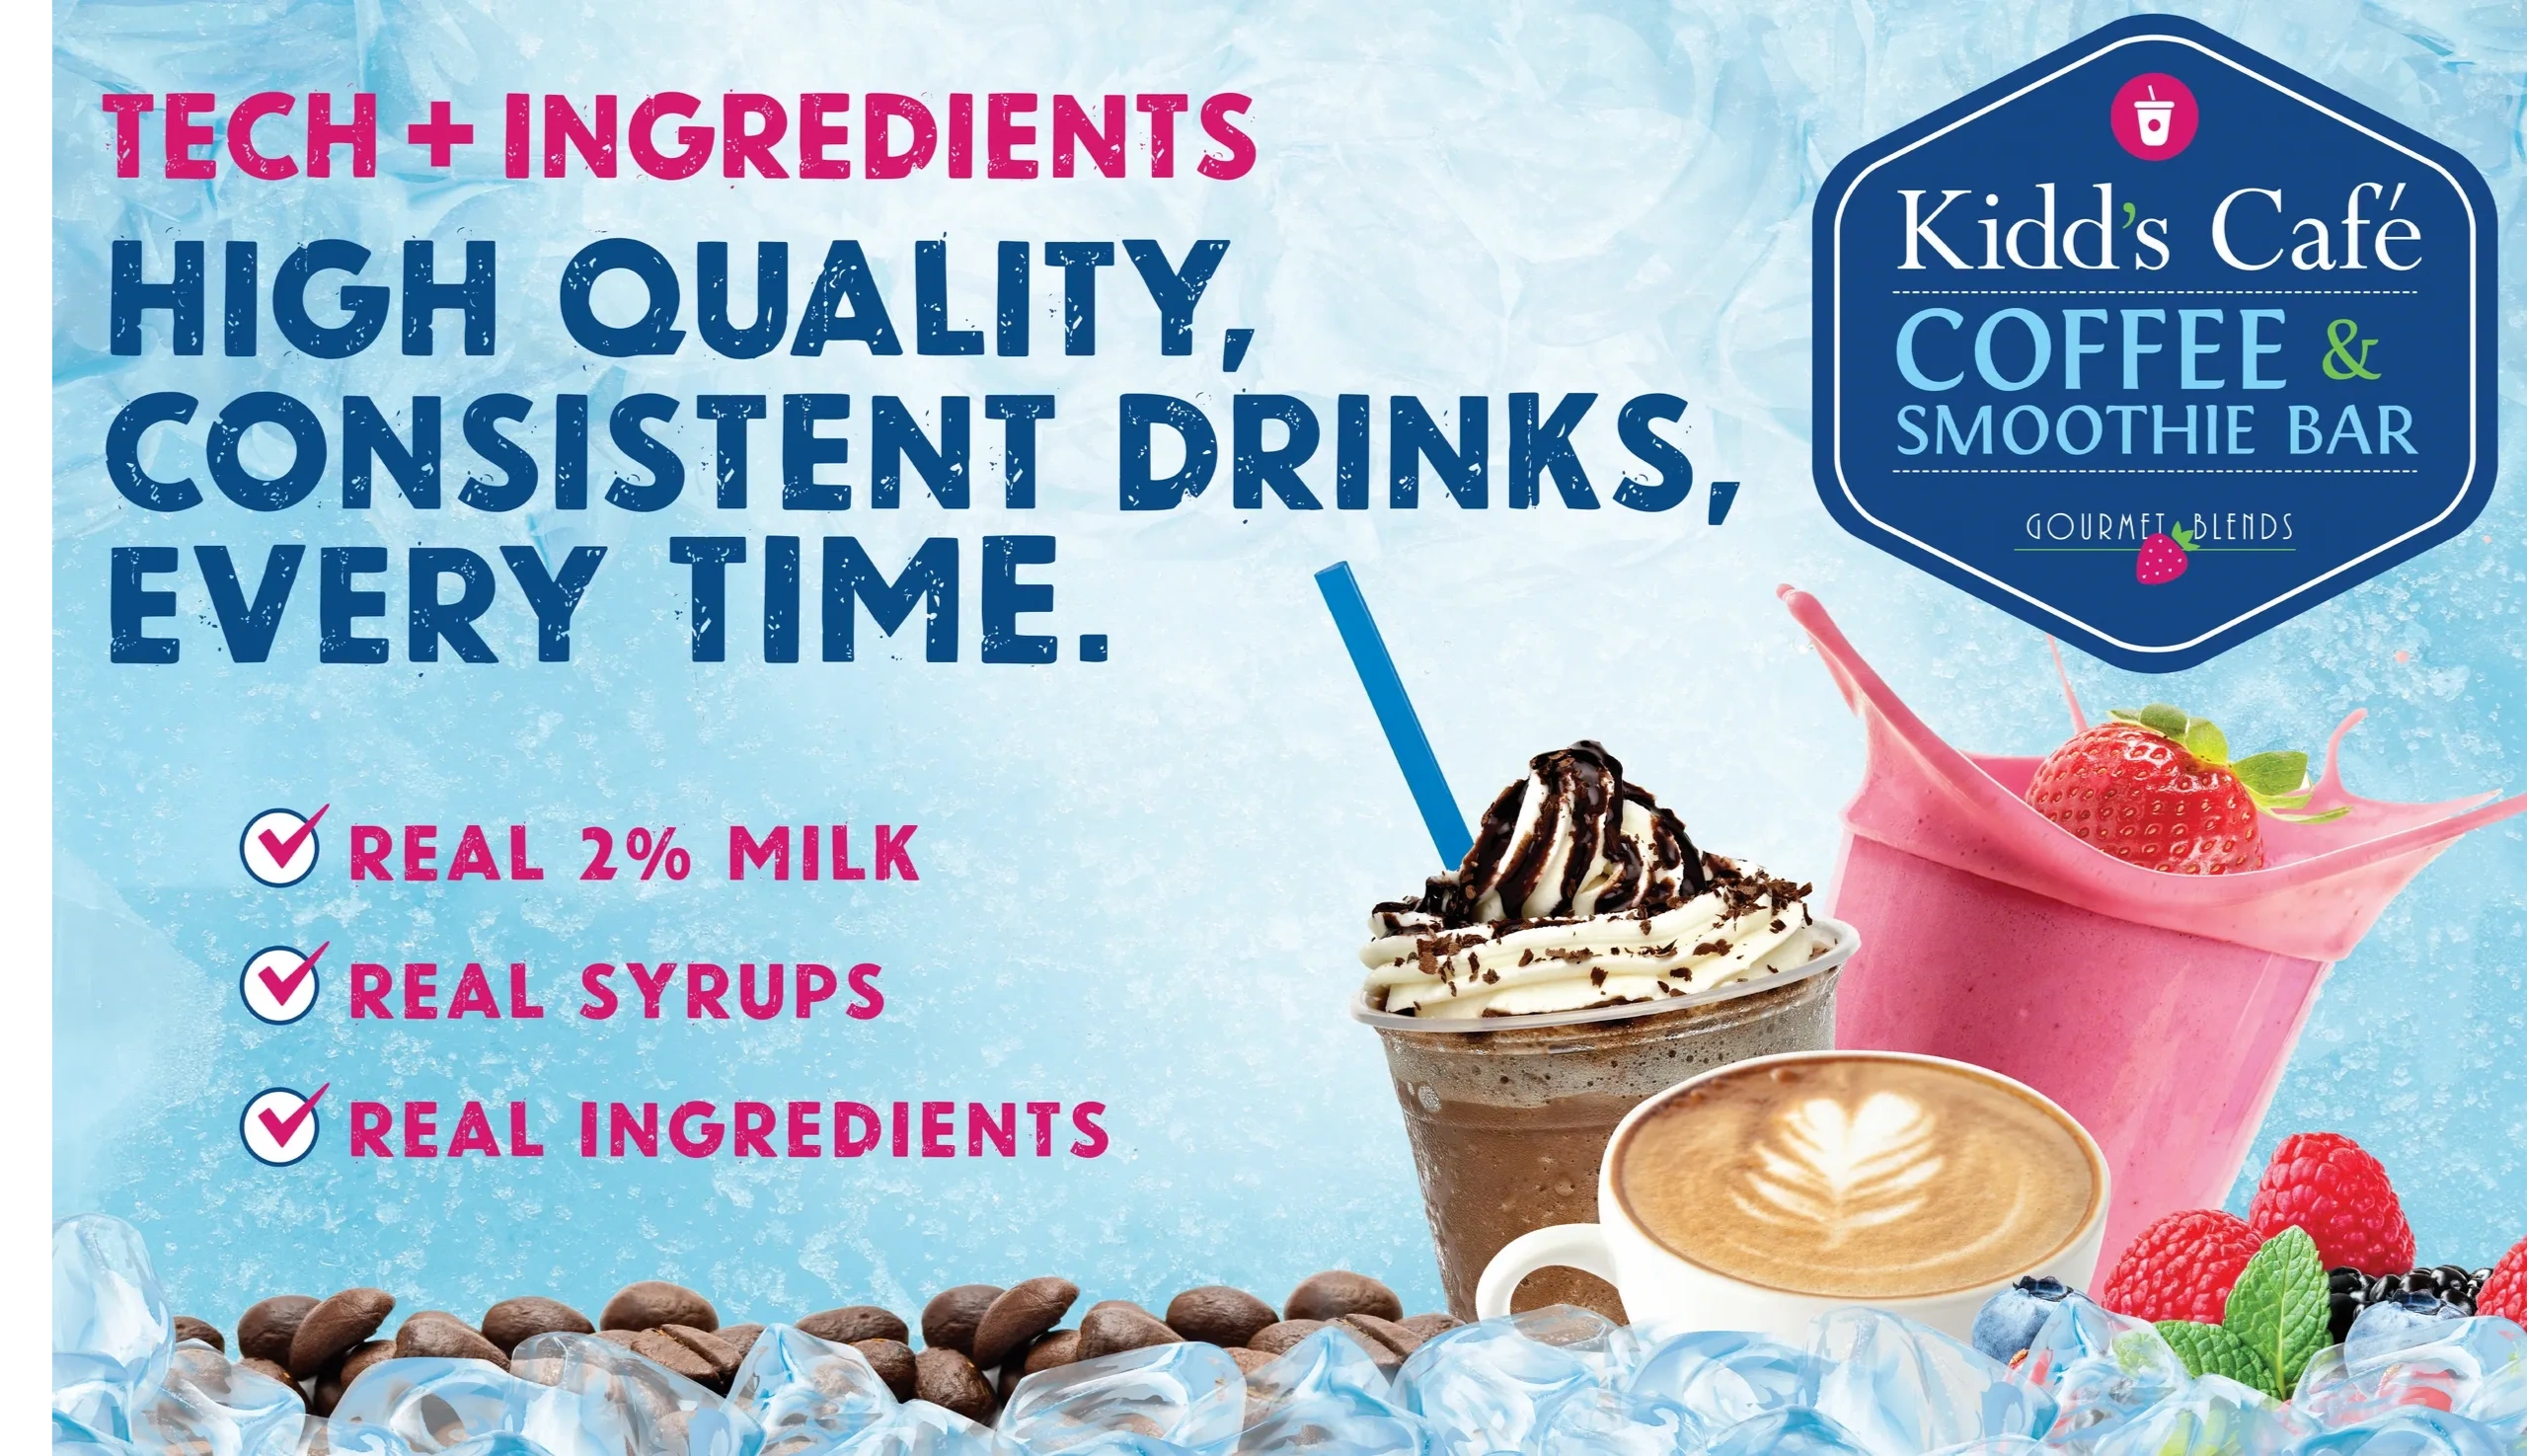 Kidd's make Coffee & Smoothies using quality ingredients consistently serving same drink every time.